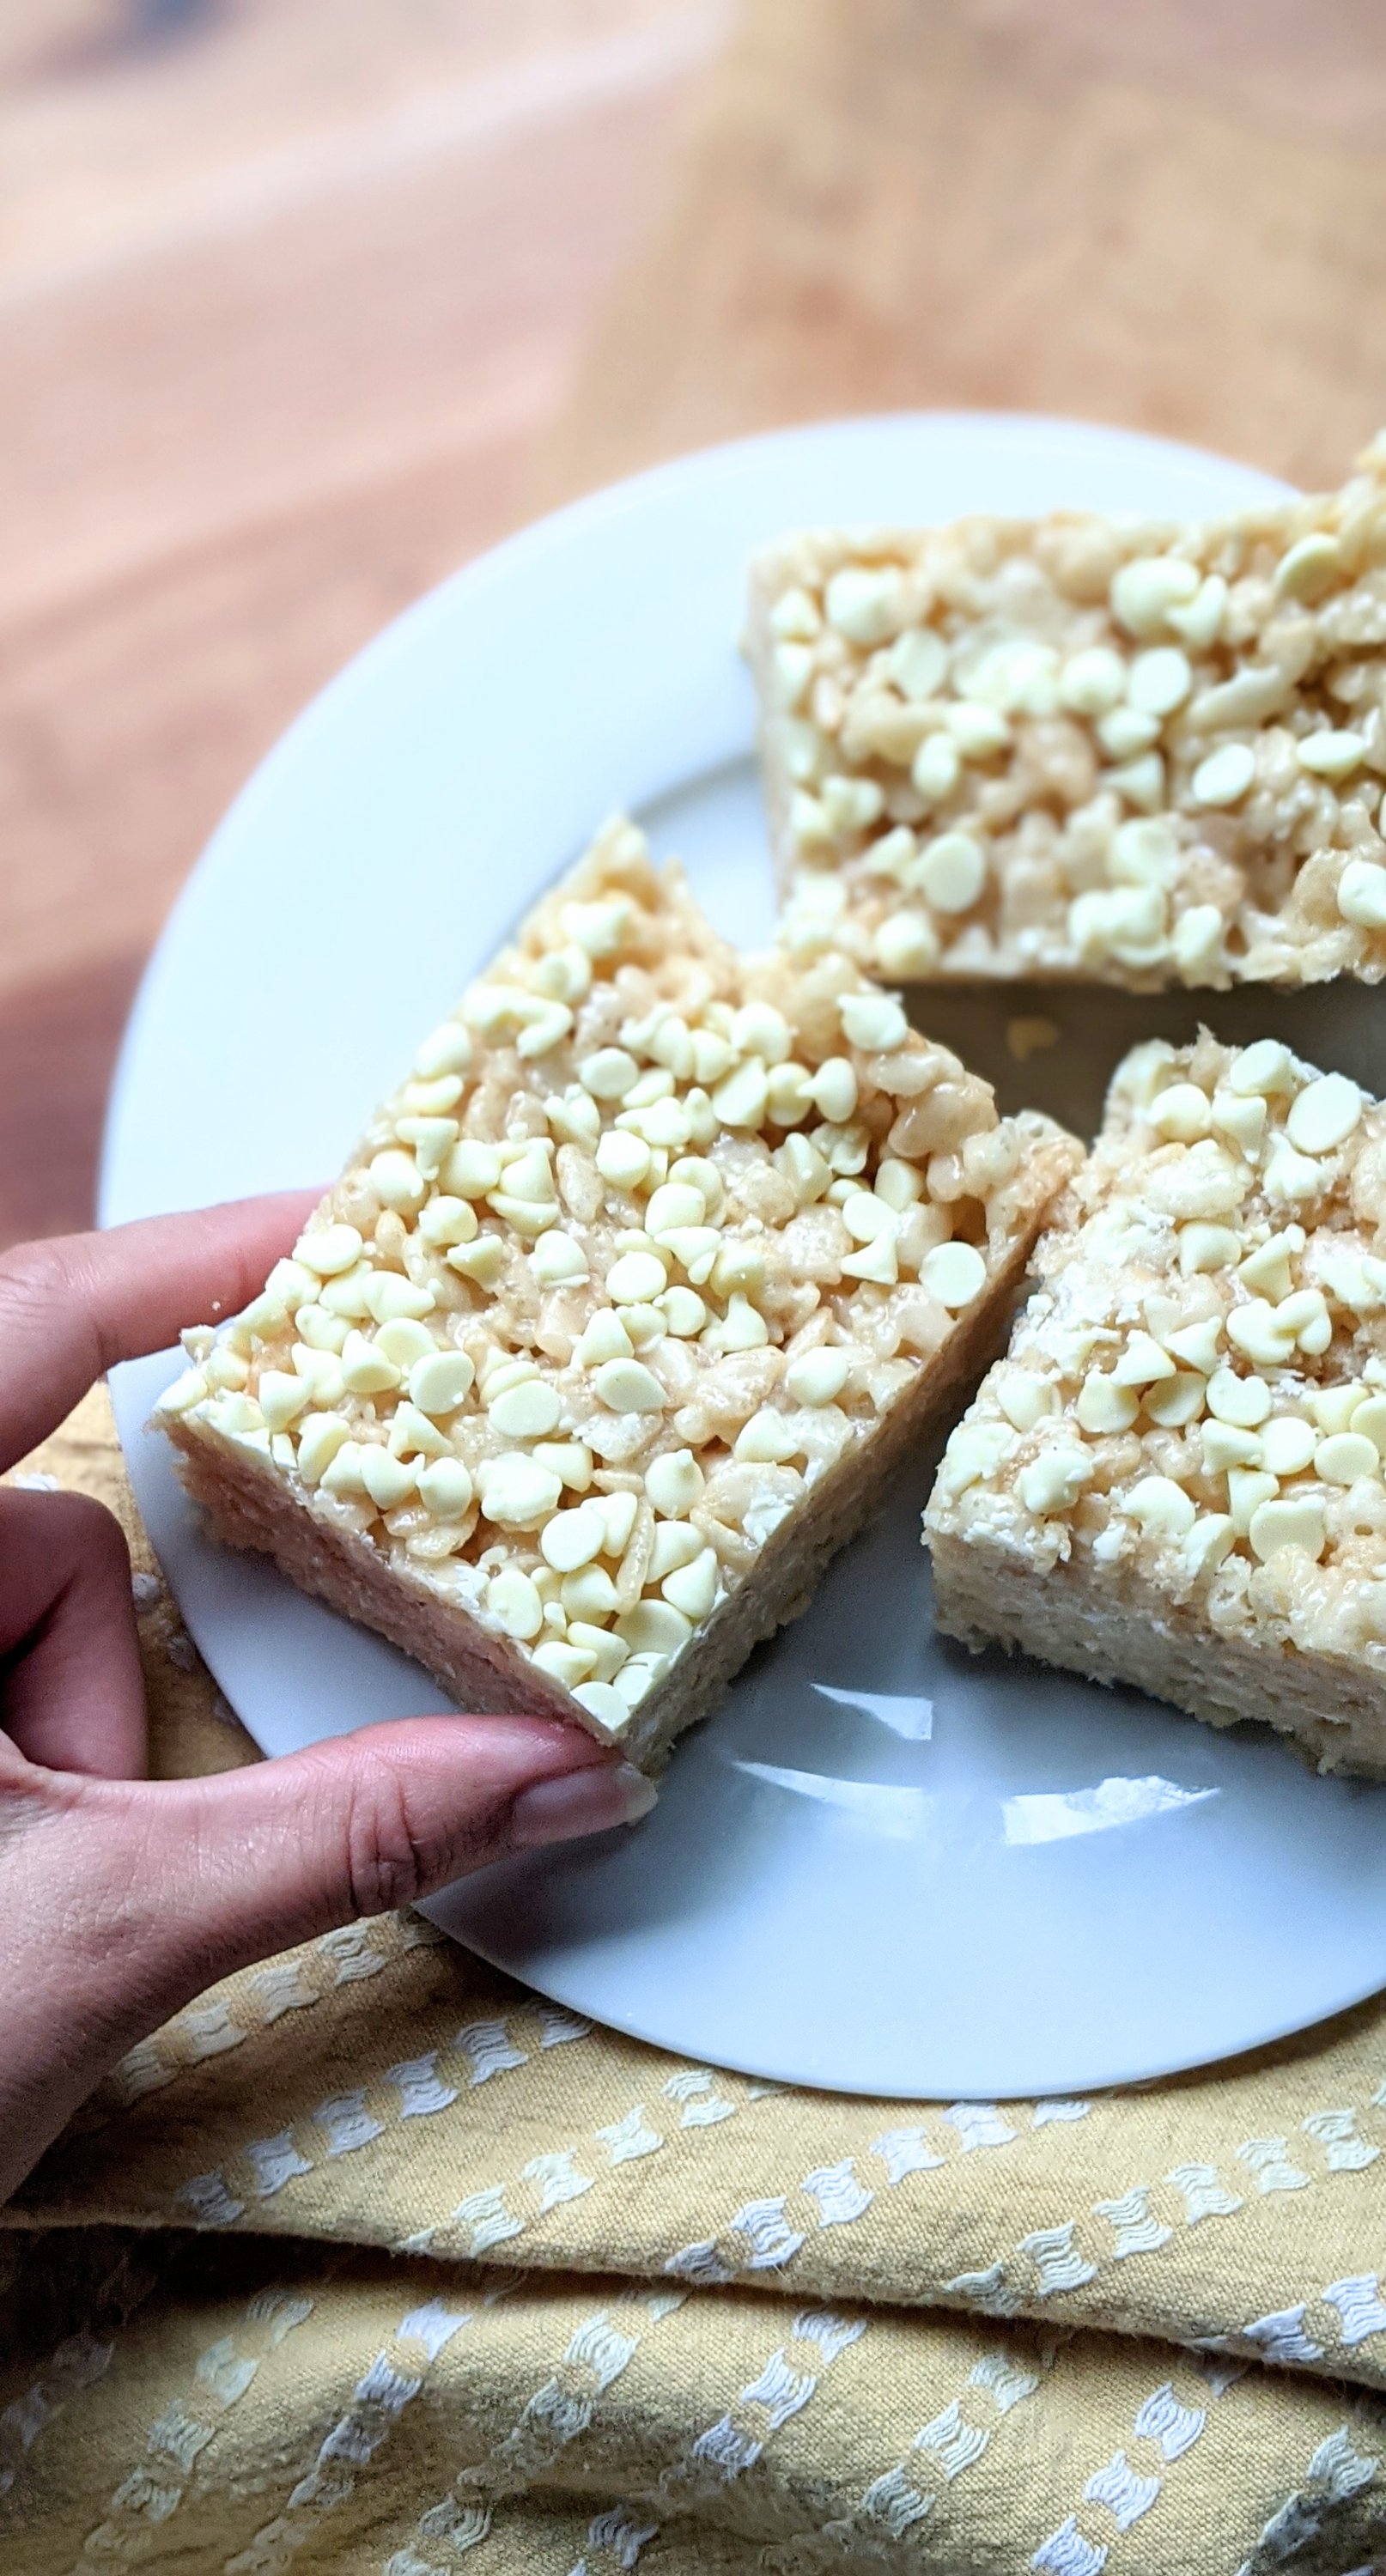 white chocolate rice crispie treats with white chocolate chips easy 15 minute dessert recipes fun desserts for potluck or bbq desserts for kids and adults